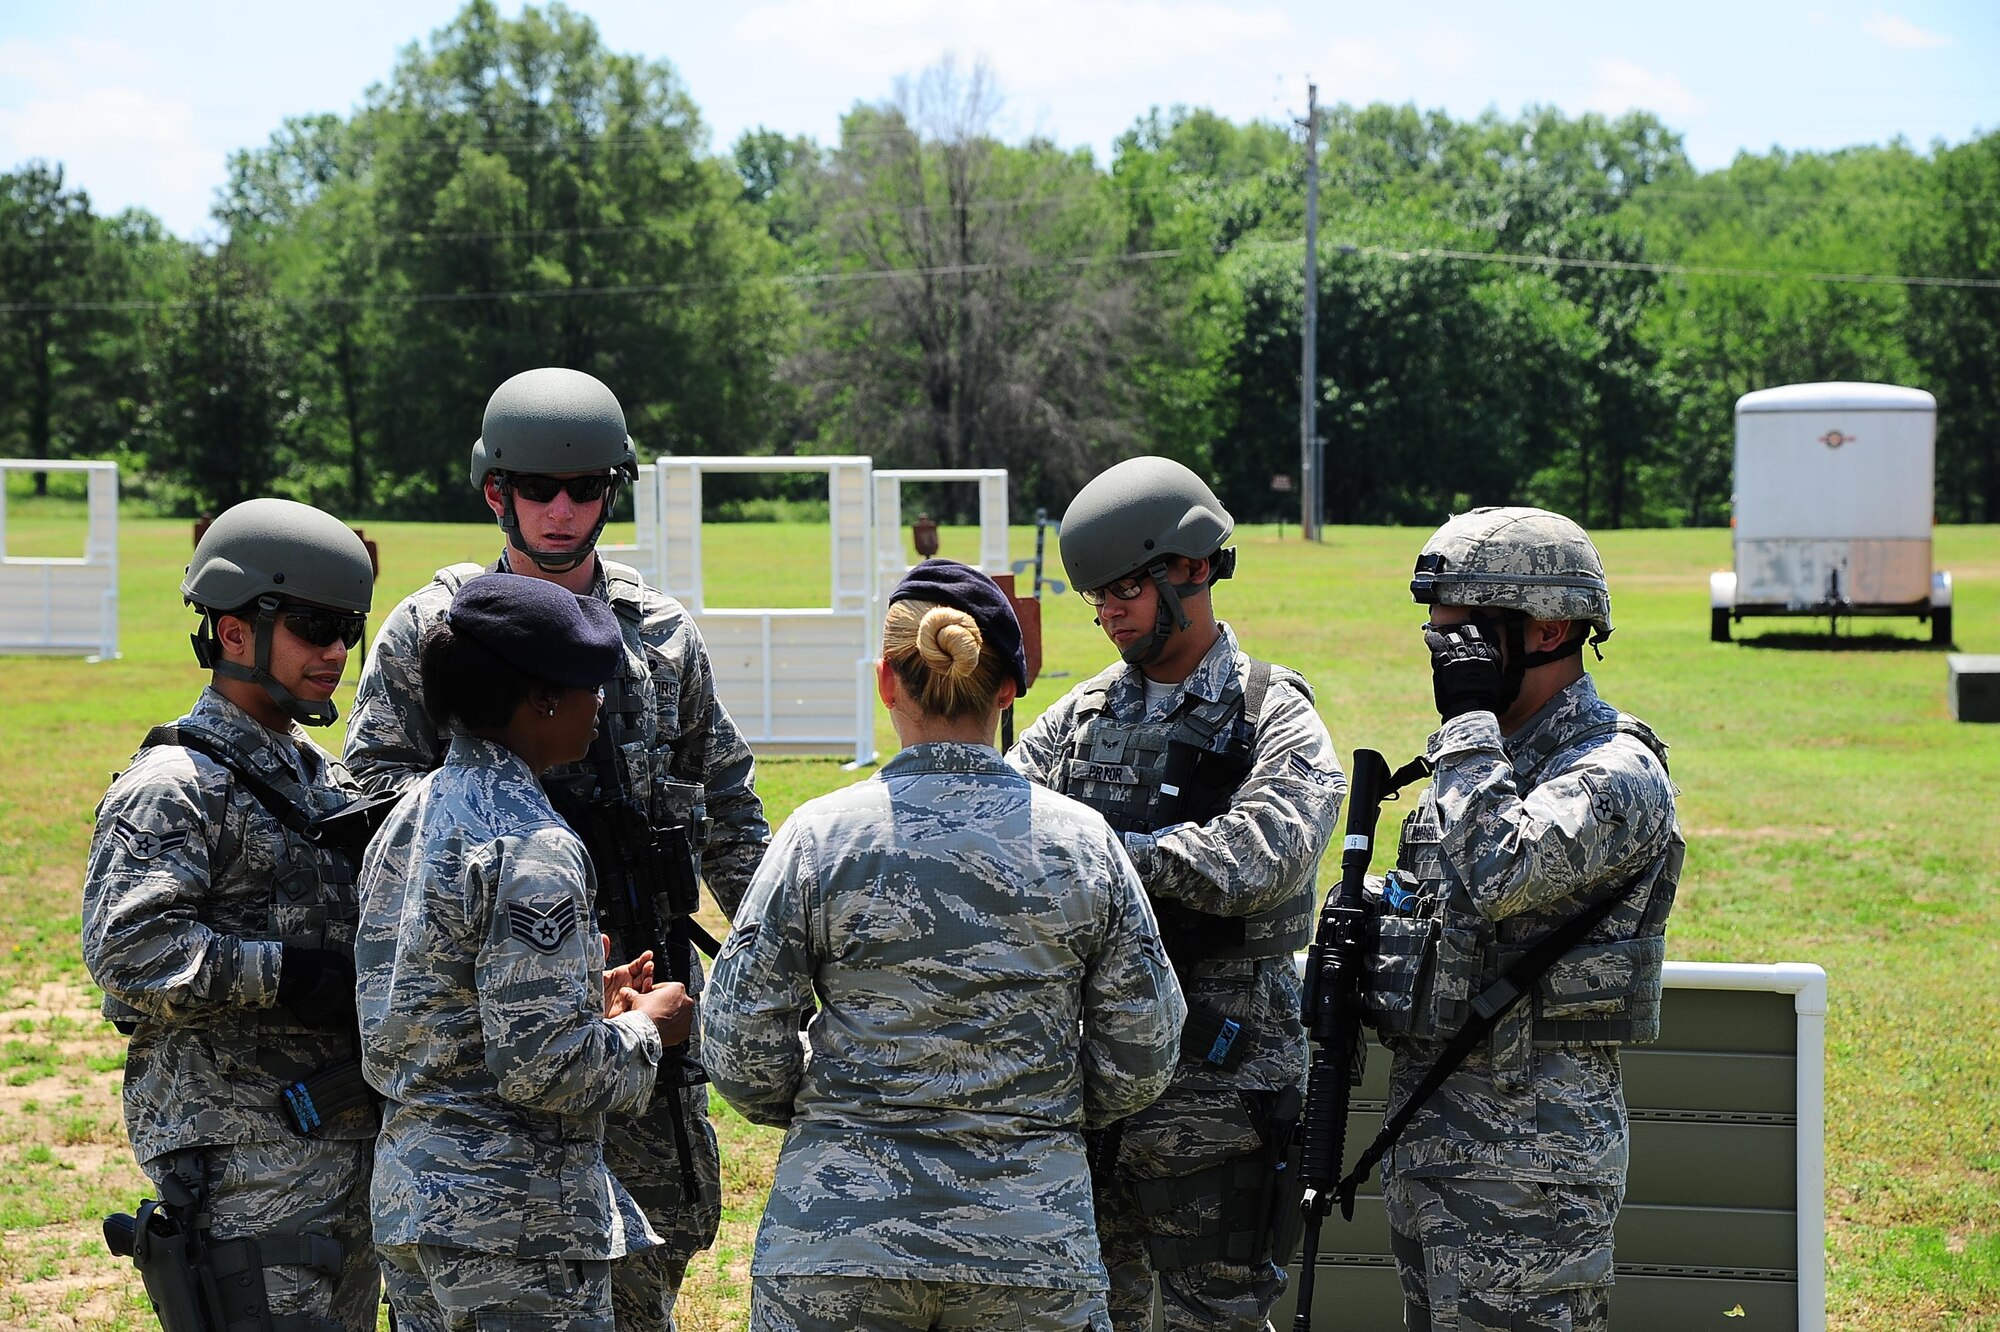 Staff Sgt. Ashley Maury and Airman 1st Class Sarah Sillitoe discuss the Shoot, Move, Communicate drill May 16, 2017, at Columbus Air Force Base, Mississippi. Defenders do this drill at least once a year to maintain weapon proficiency and tactics. (U.S. Air Force photo by Airman 1st Class Beaux Hebert)